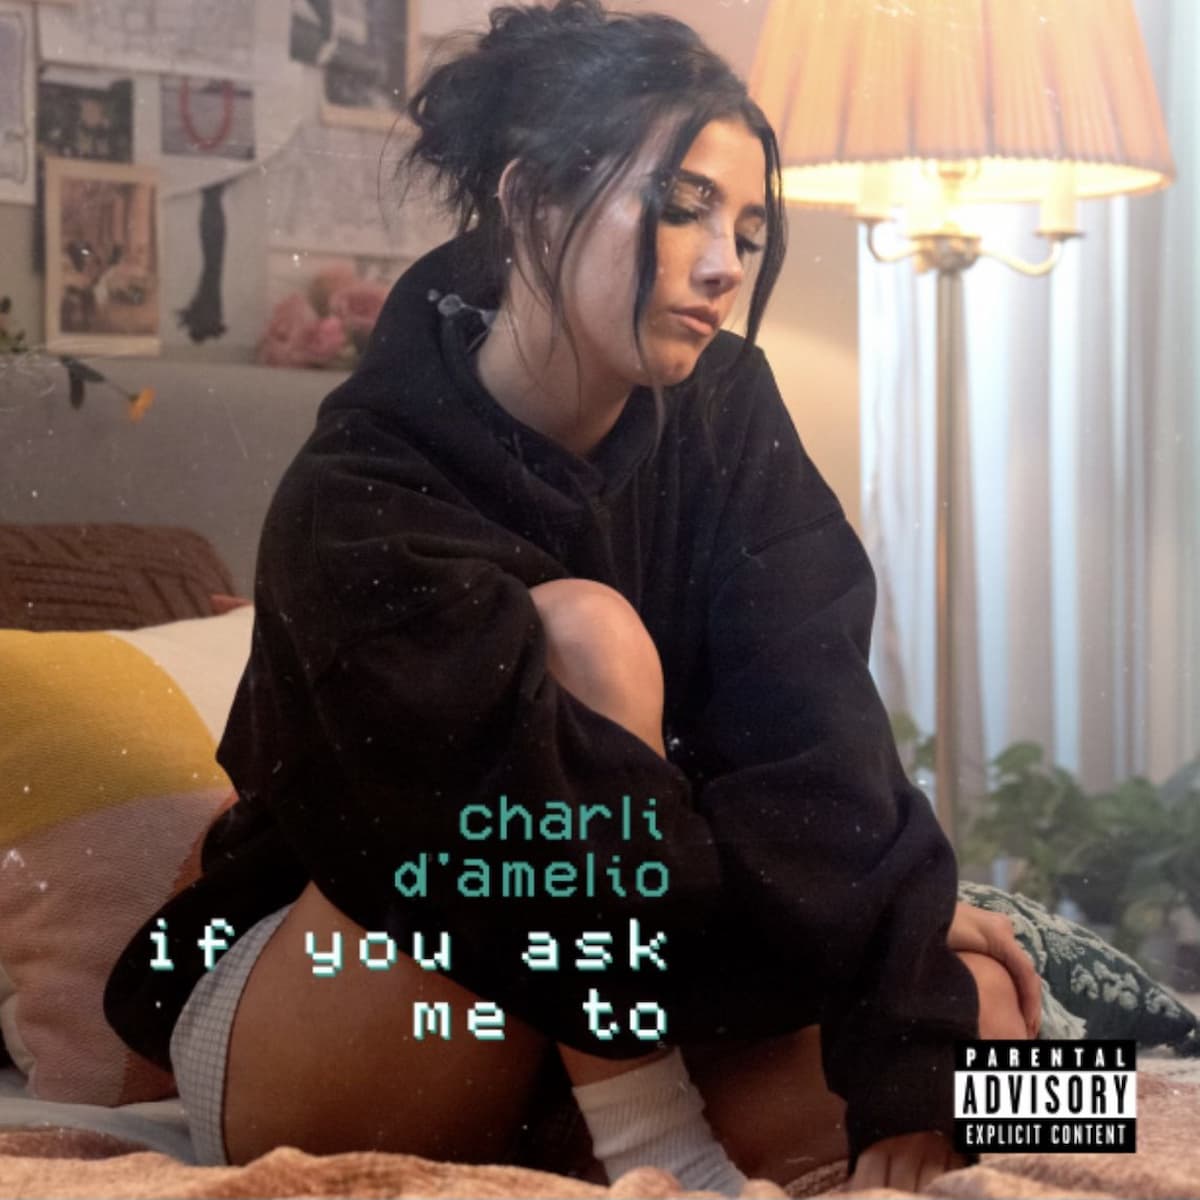 Charli D' Amelio “If You Ask Me To” - Song der Siegerin Dancing with the Stars 2022 - hier im Bild das Single-Cover mit Charli D' Amelio